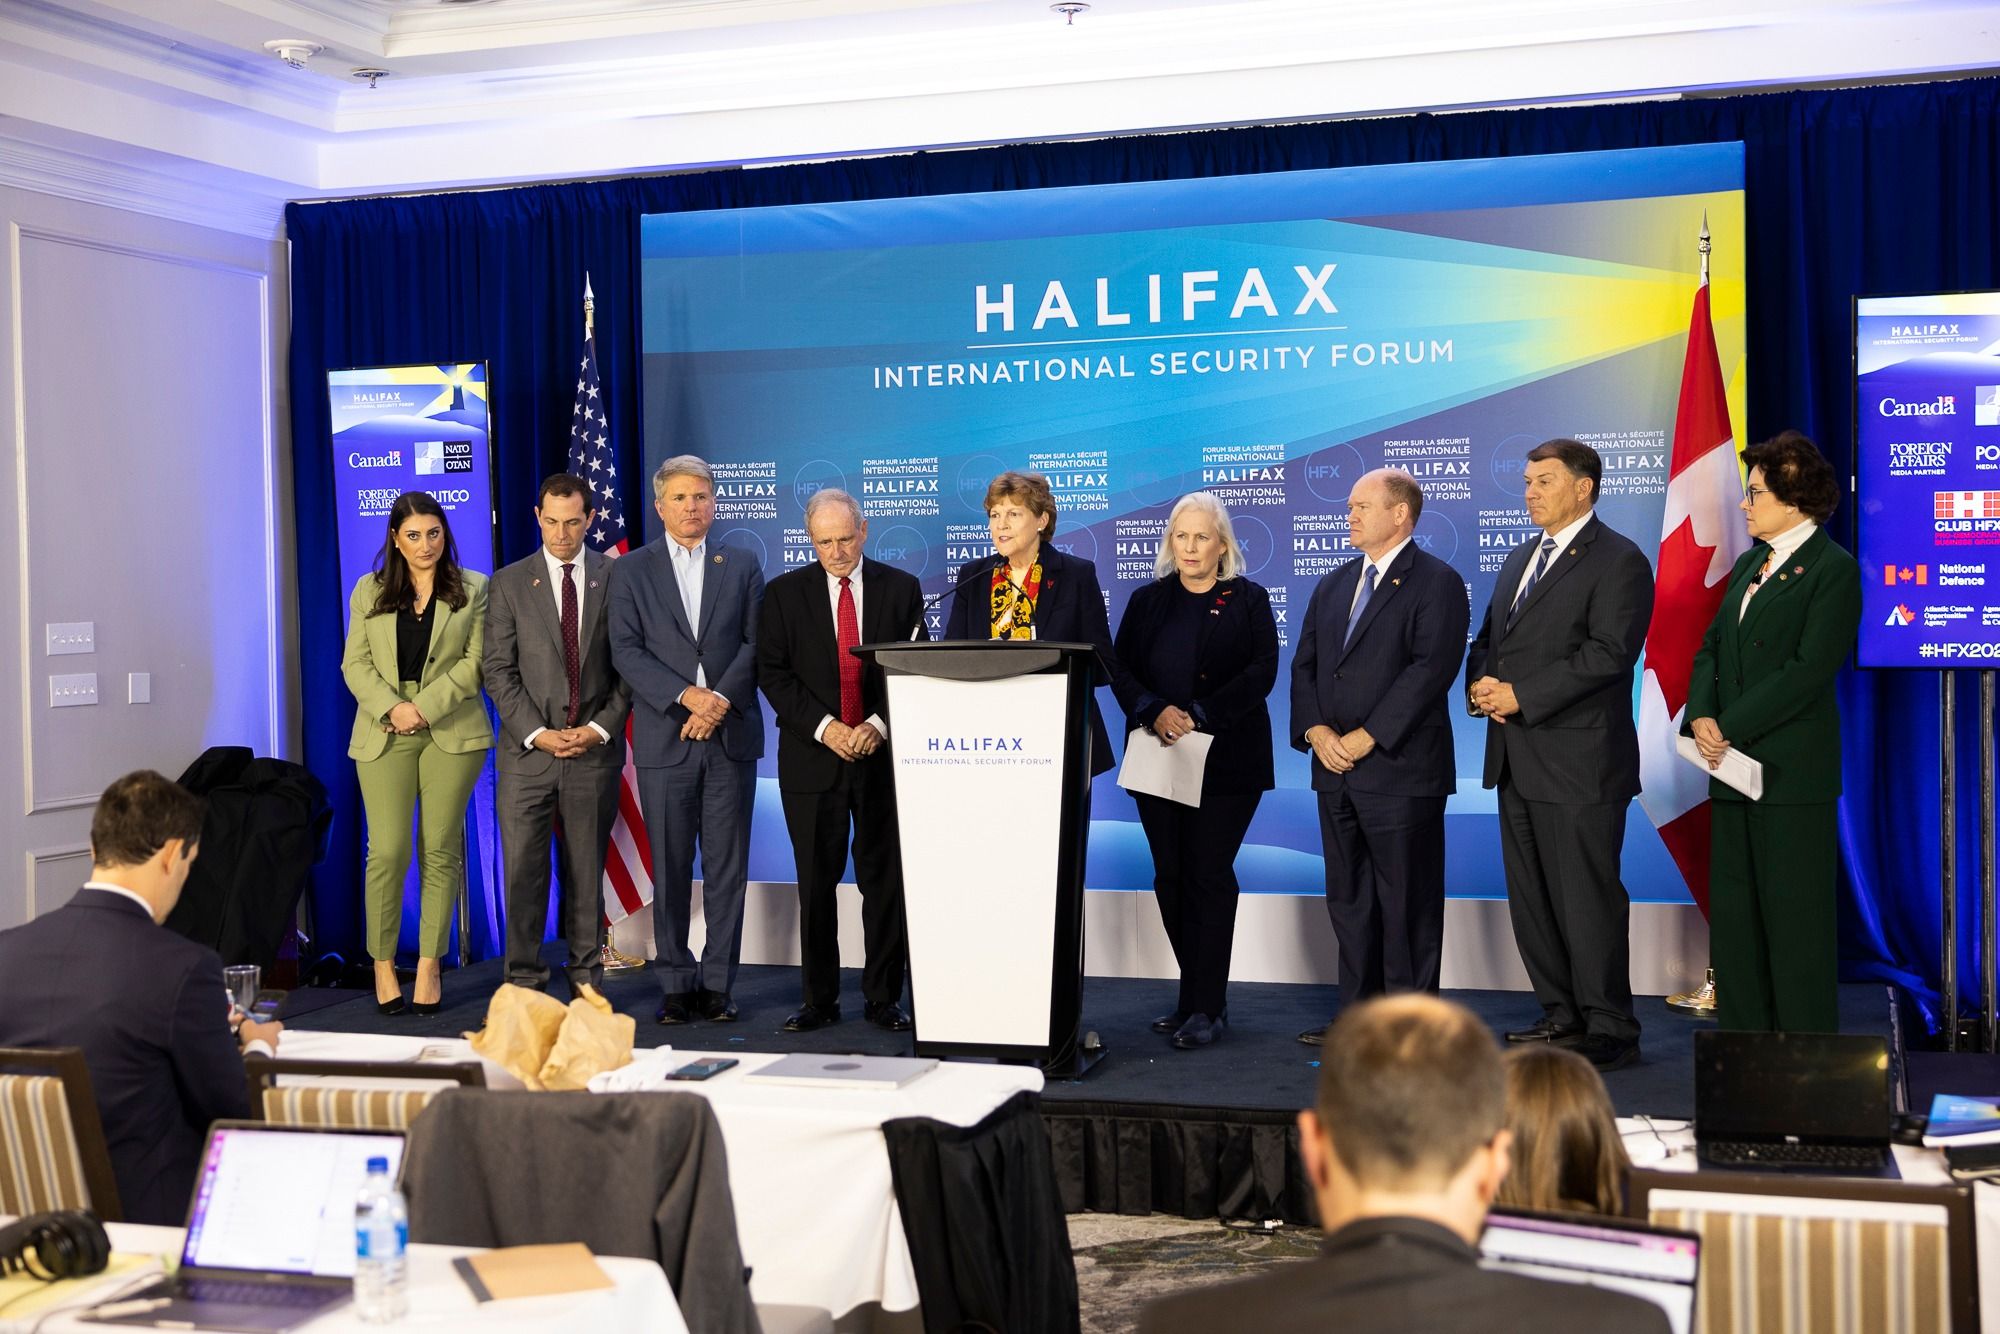 Panelists Extol Western Military Principles at Halifax Forum, Warn of ‘Too Much Critical Thinking’